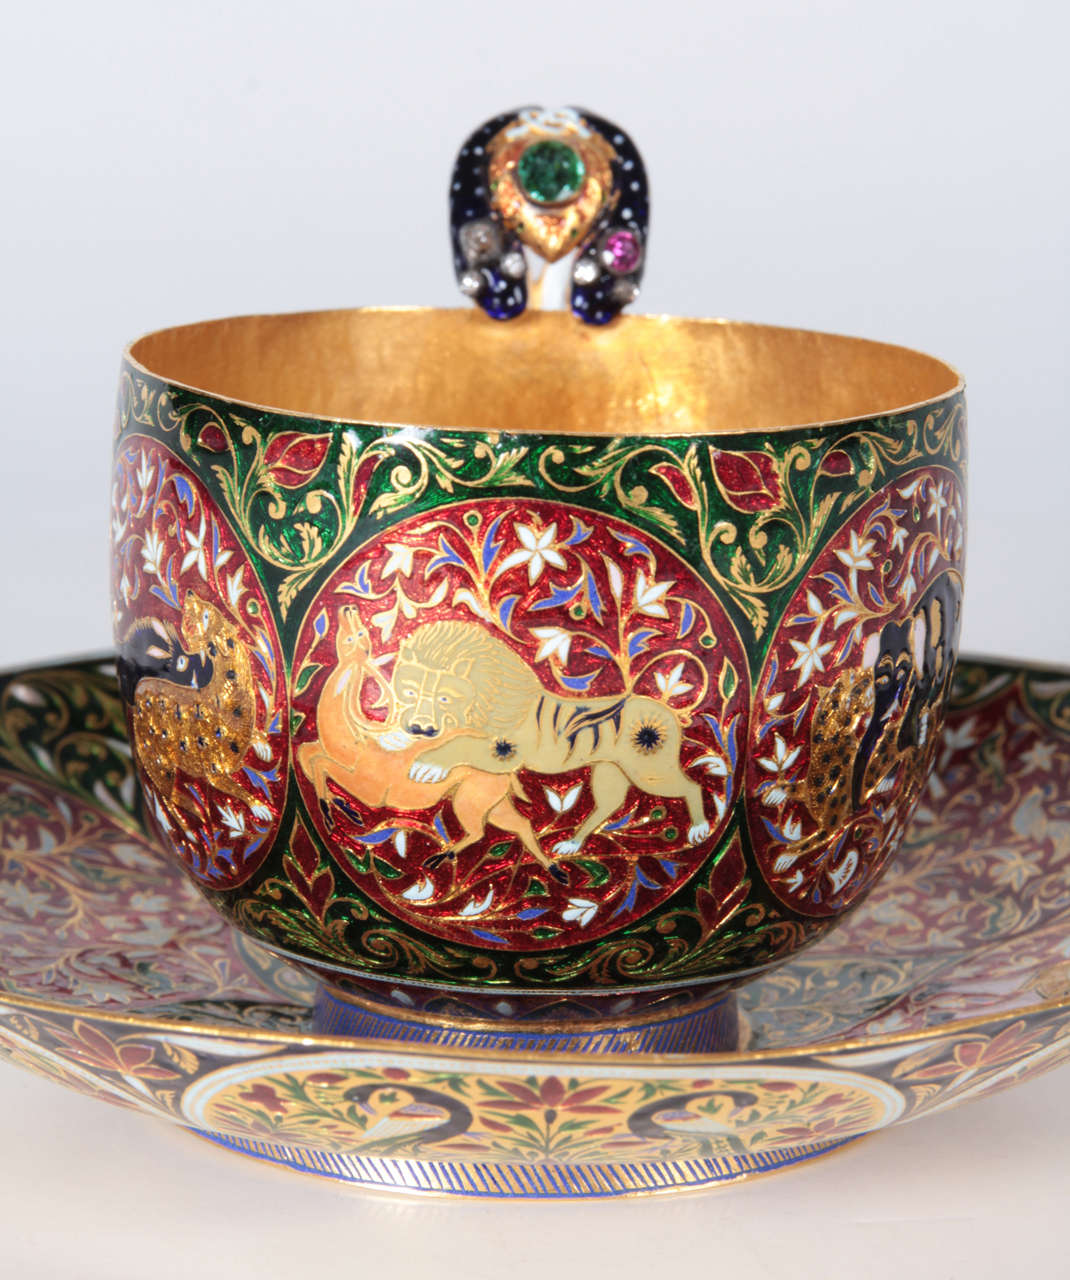 Jaipur Enameled and Gem Set Rare Solid Gold Cup and Saucer mid 19th Century For Sale 1